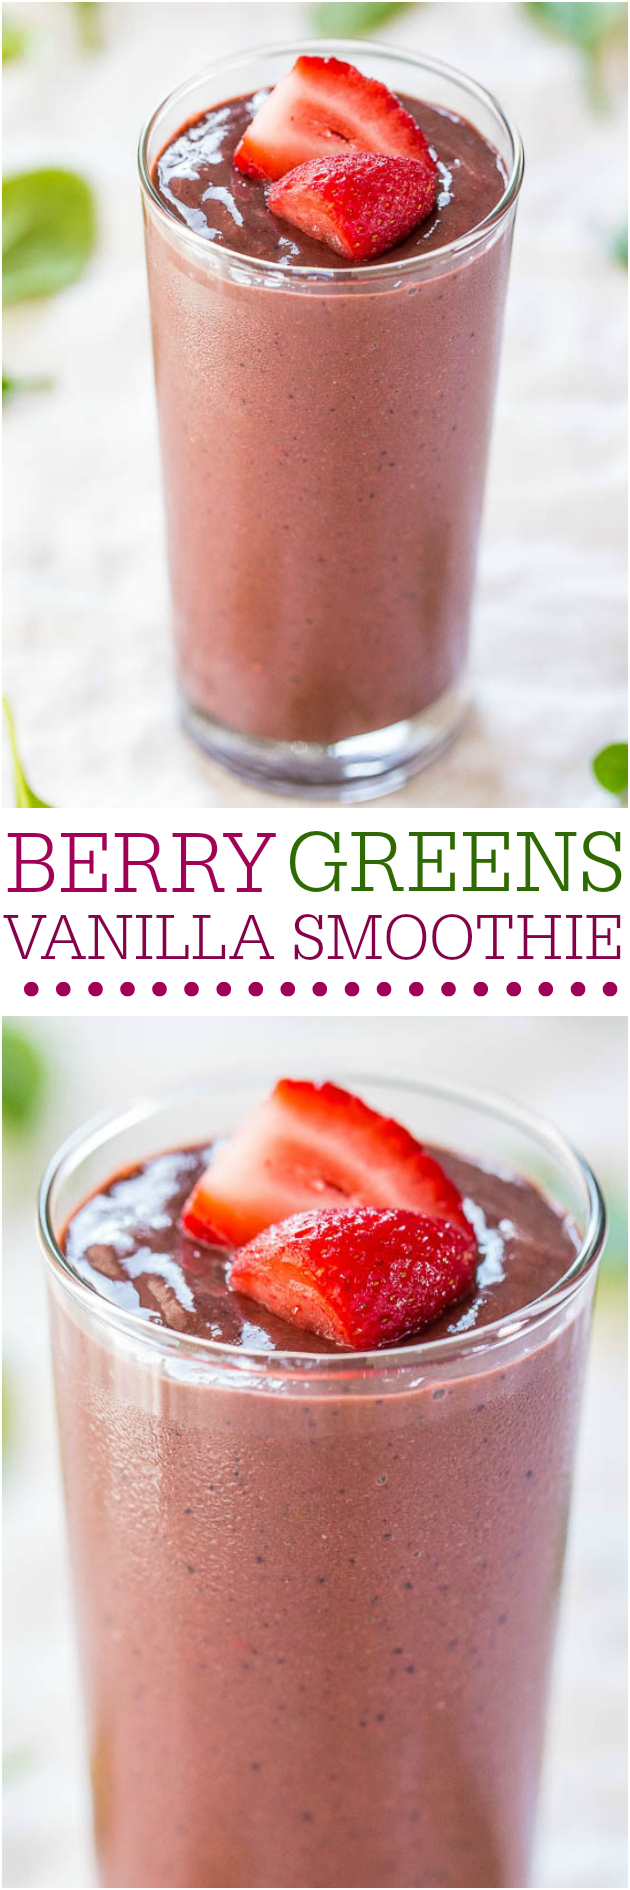 Berry Greens Vanilla Smoothie - Healthy, easy, and tastes amazing!! You'd never guess it's packed with greens and so good FOR you!!